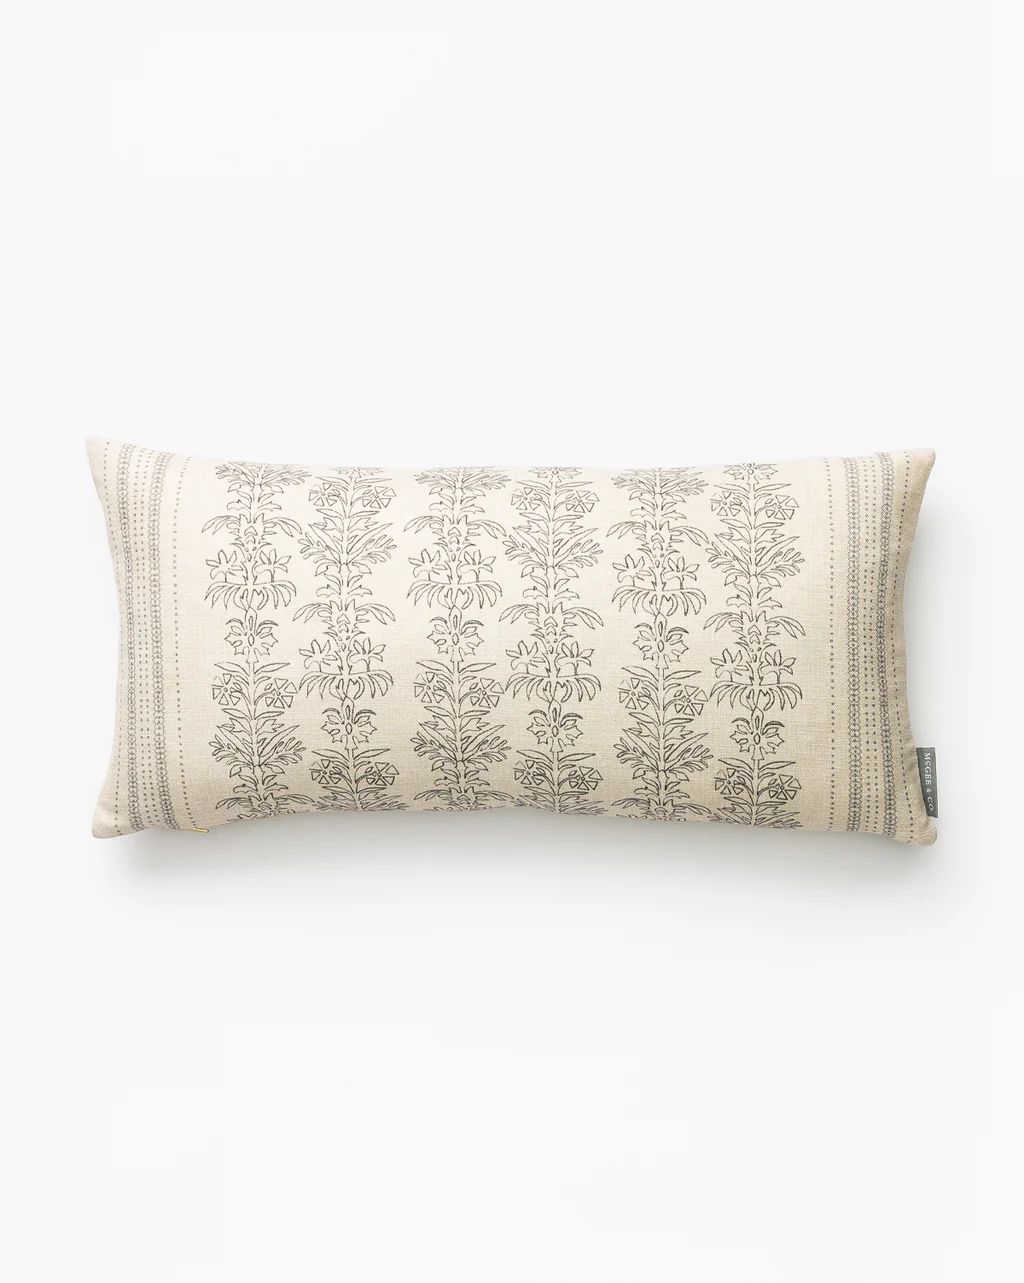 Demi Floral Stripe Pillow Cover | McGee & Co.